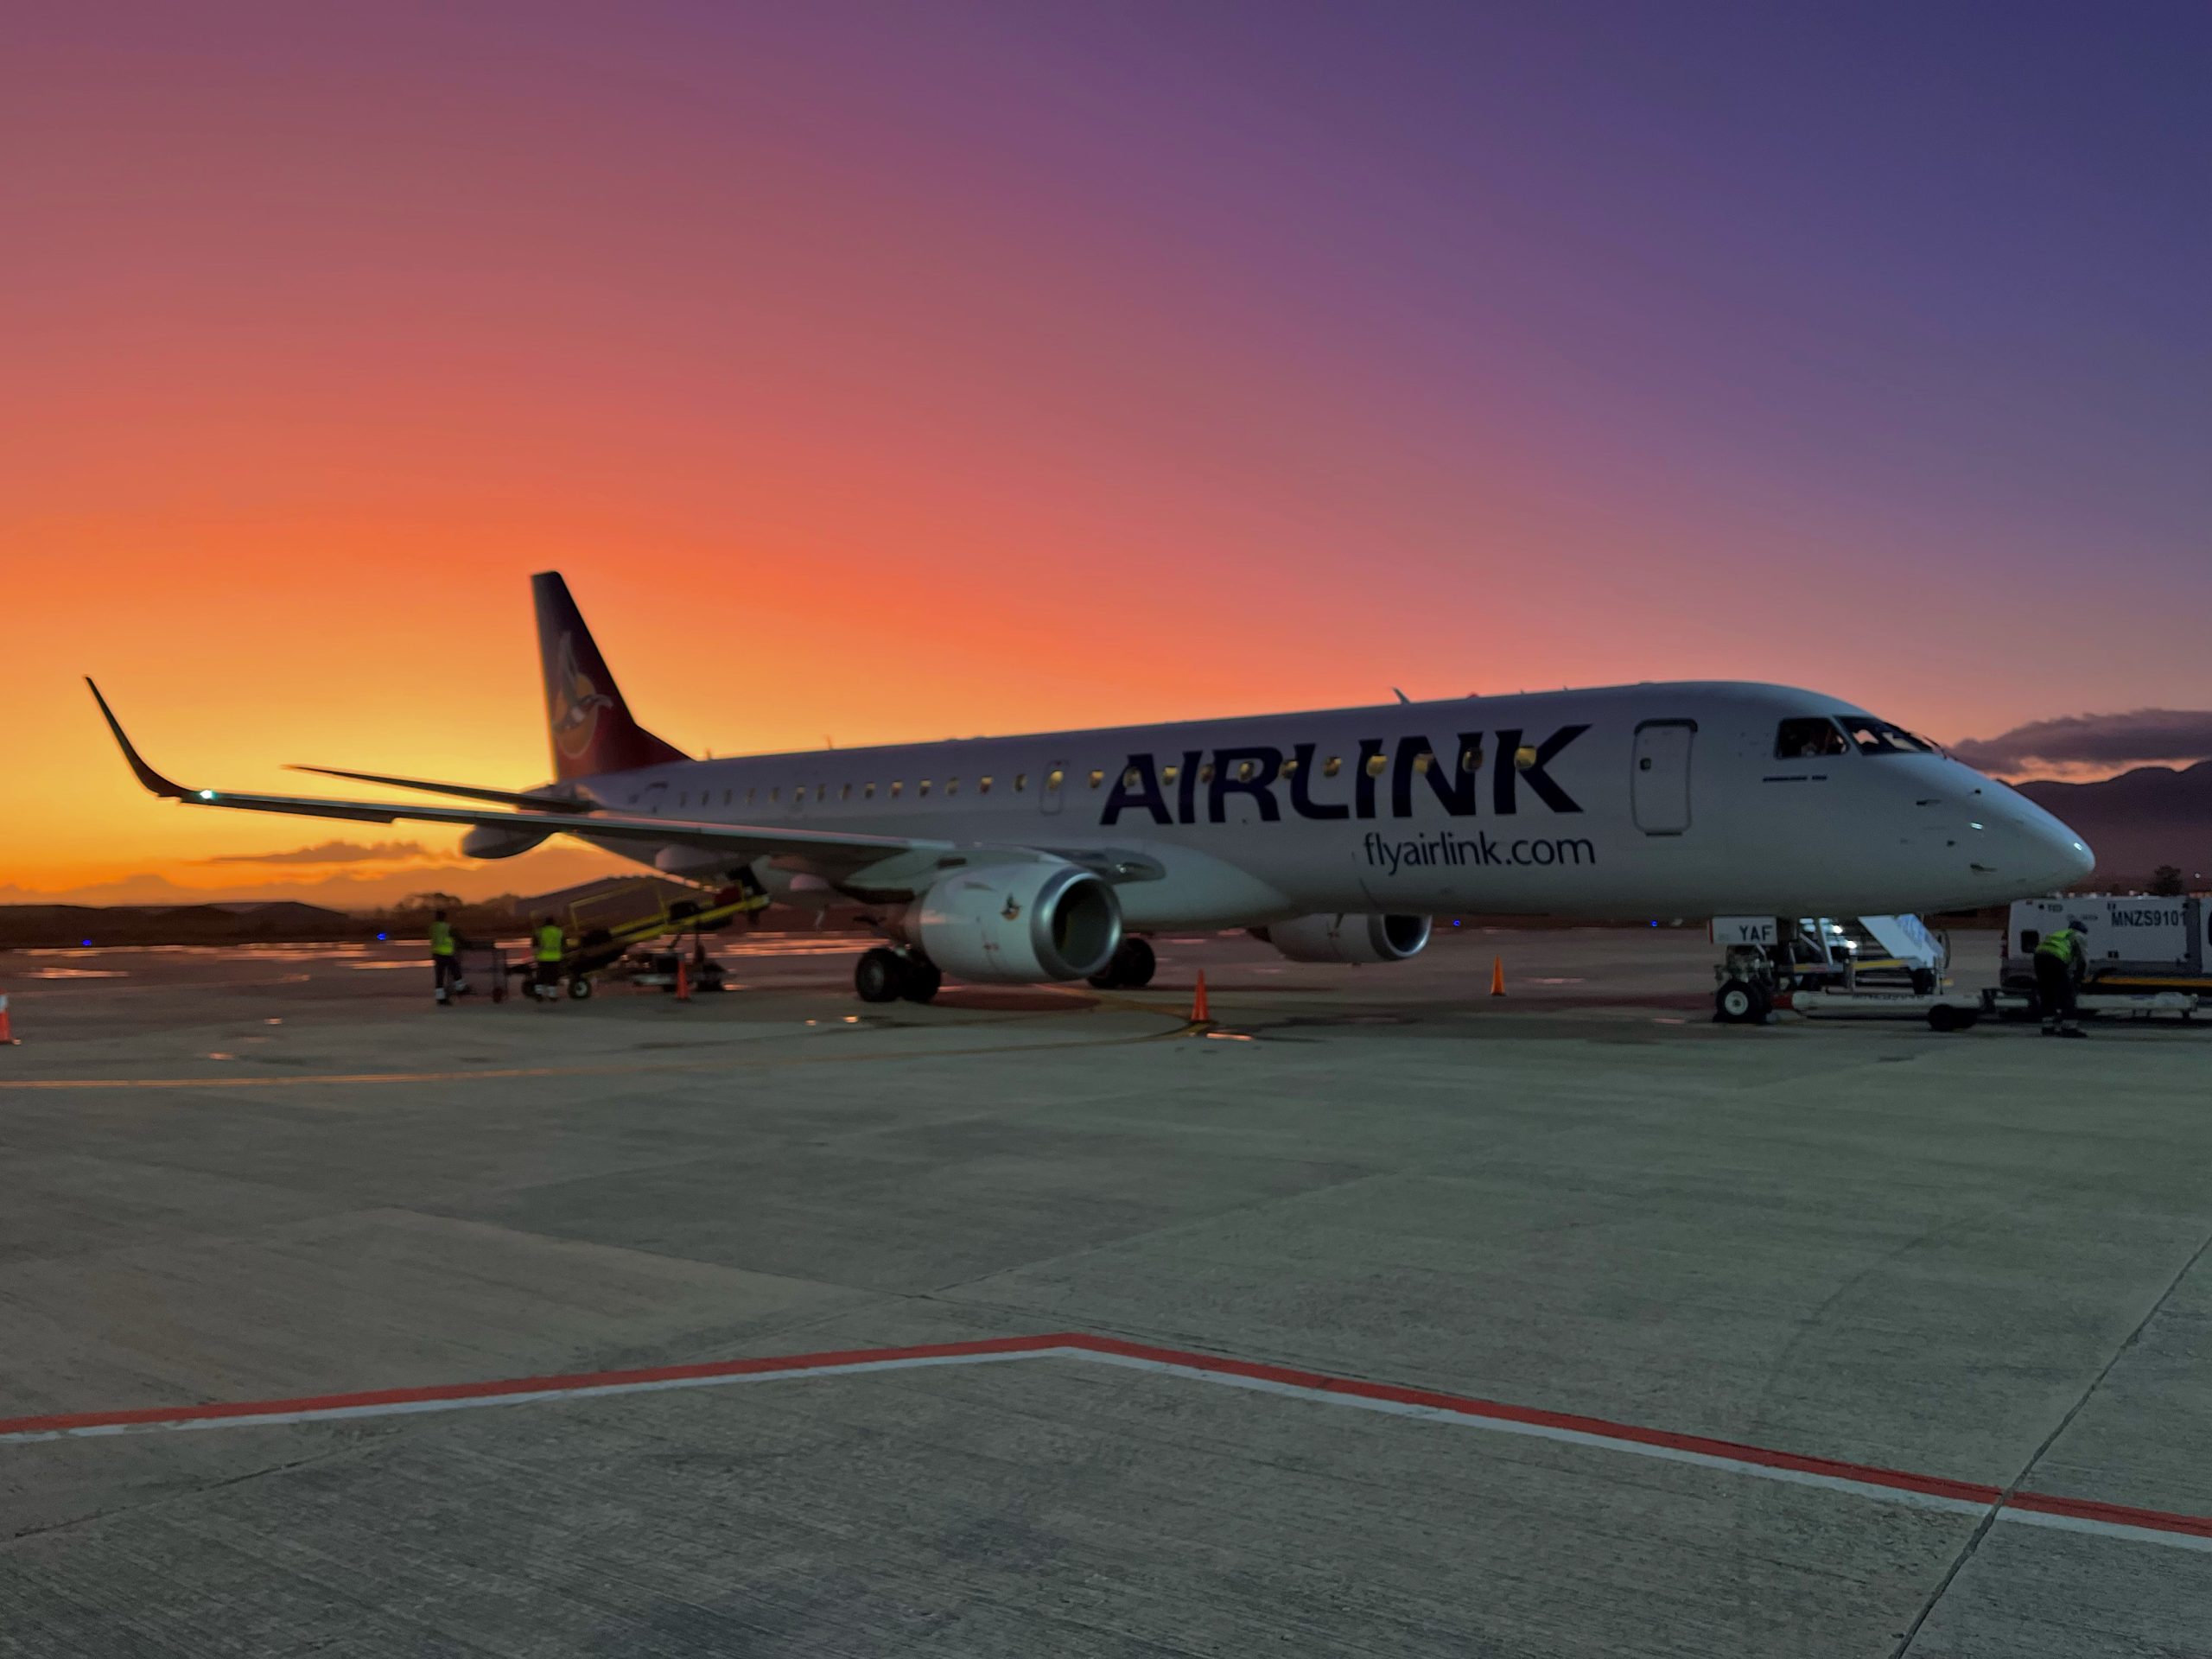 Airlink aircraft on tarmac